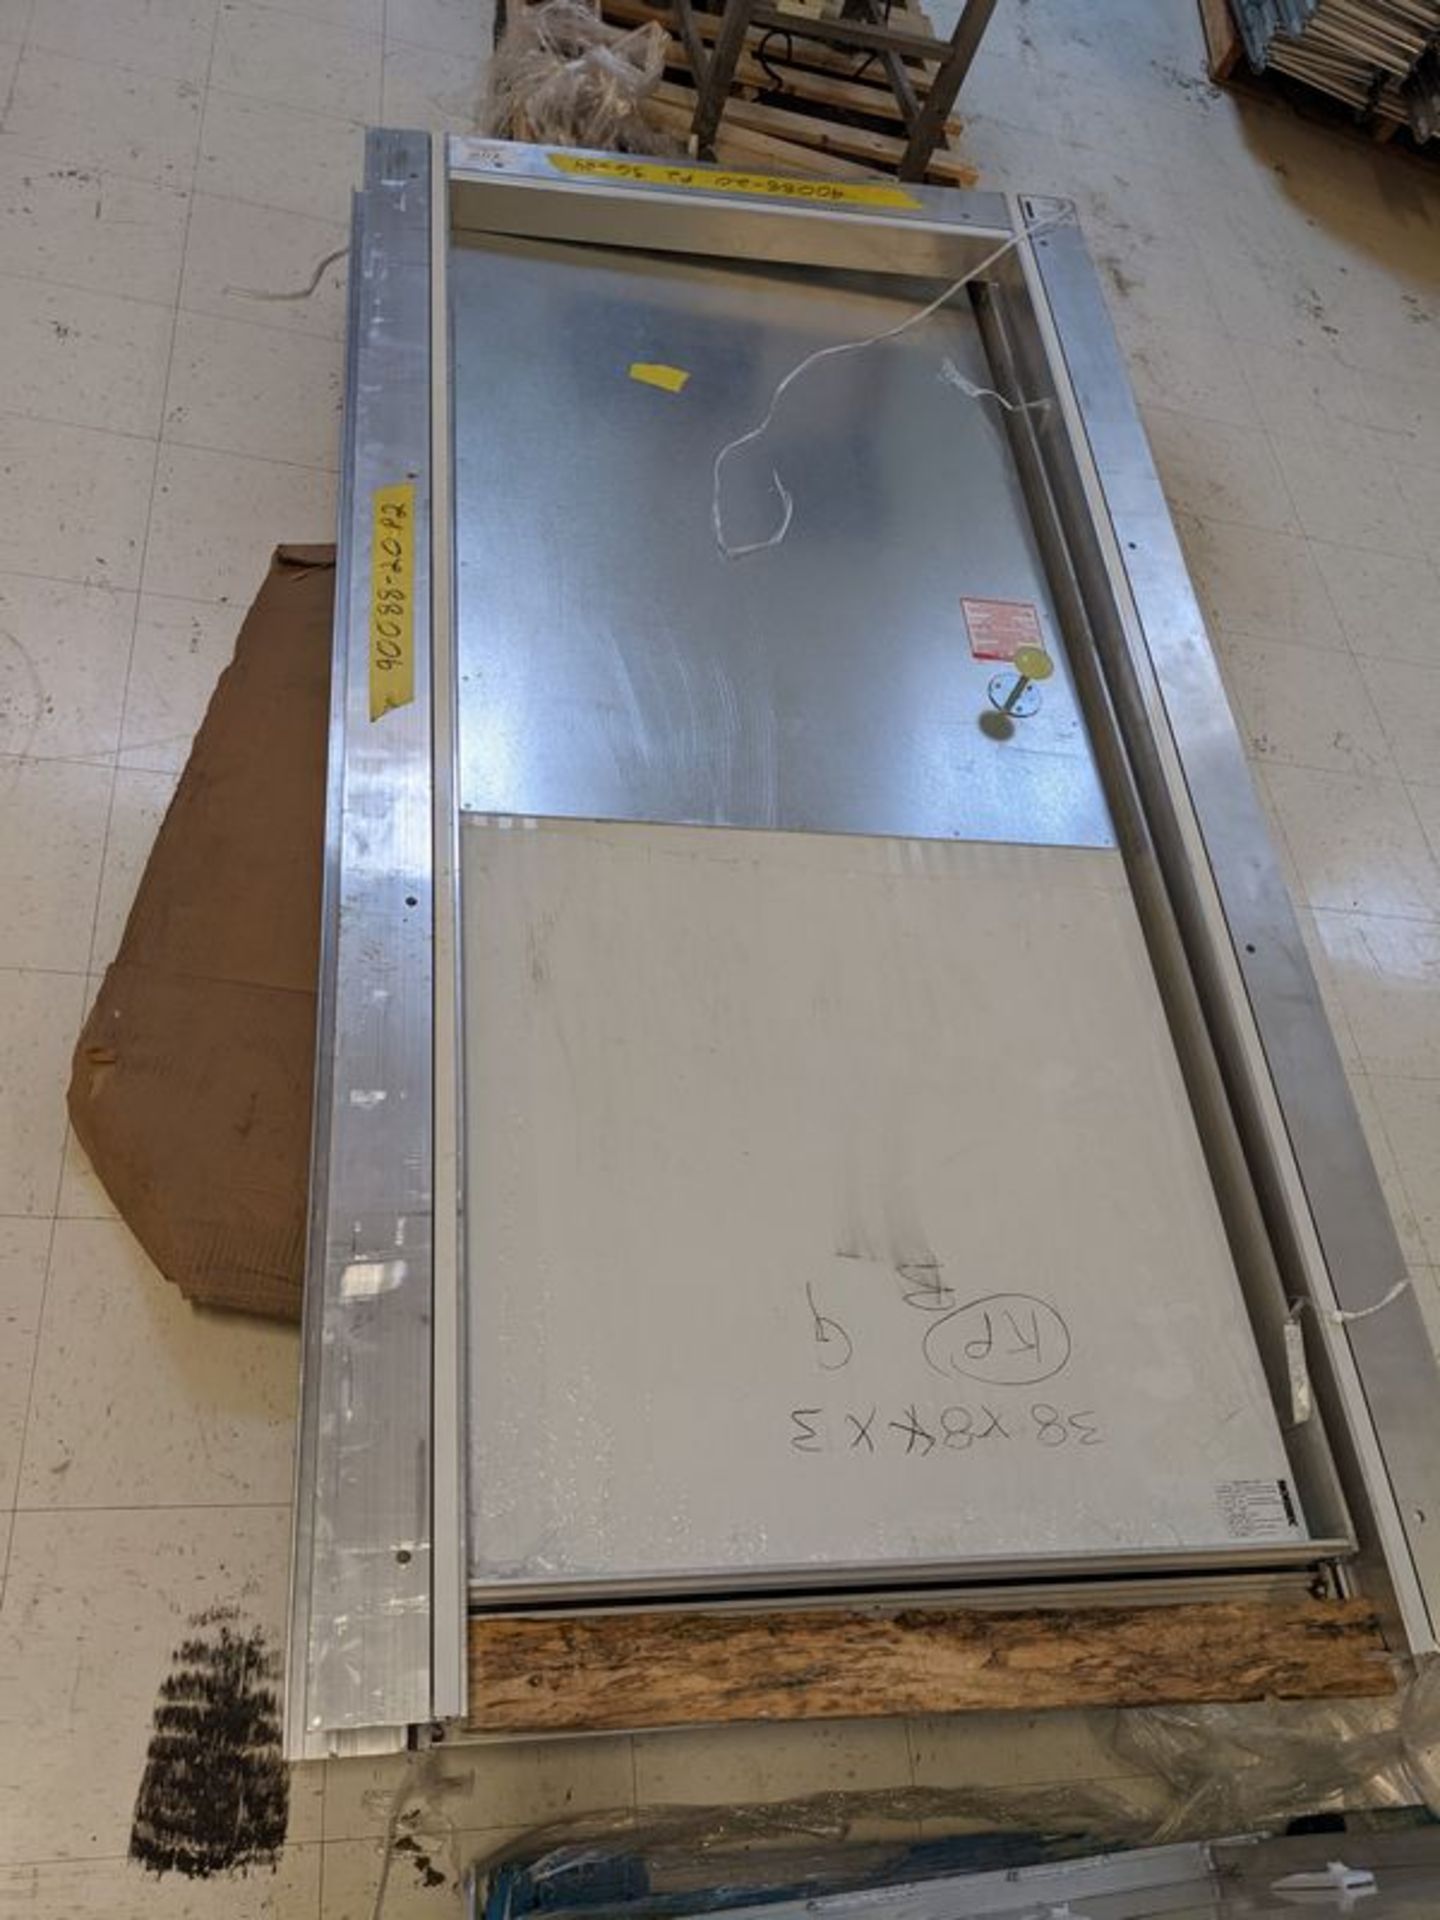 Norbec Walk in Cooler Door and Frame - Seems to be unused - Image 2 of 2